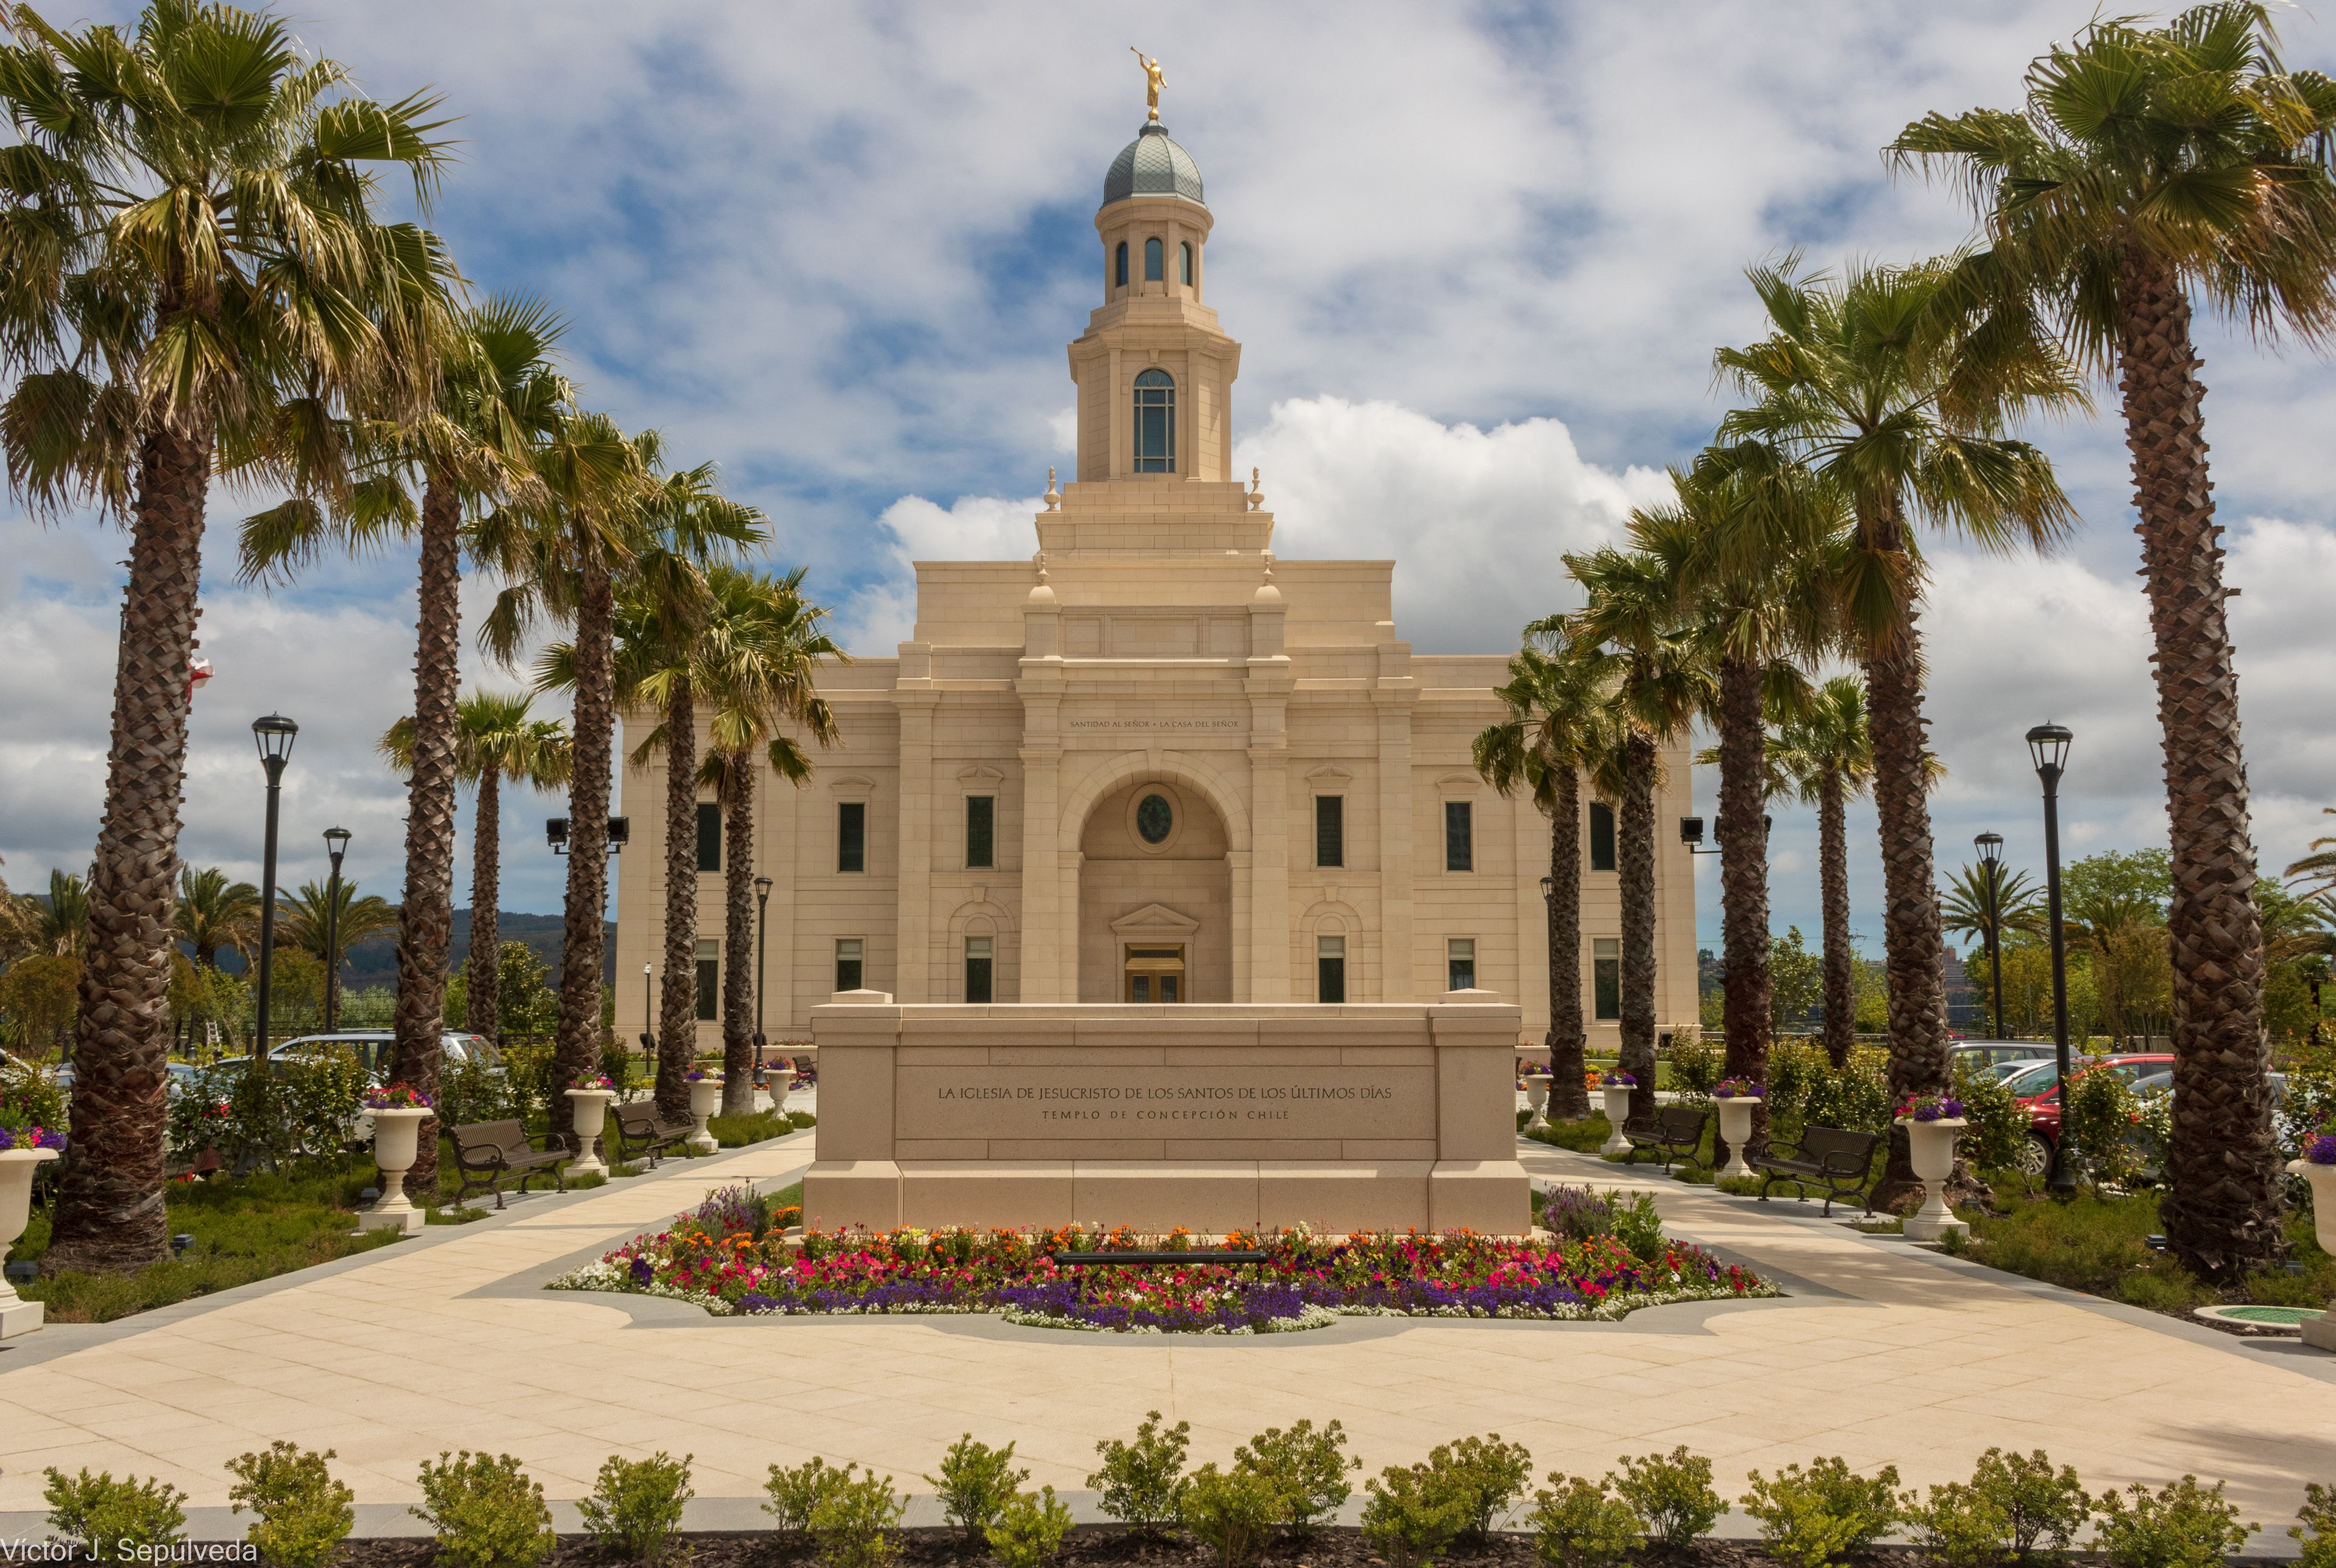 A full view of the Concepción Chile Temple and grounds.